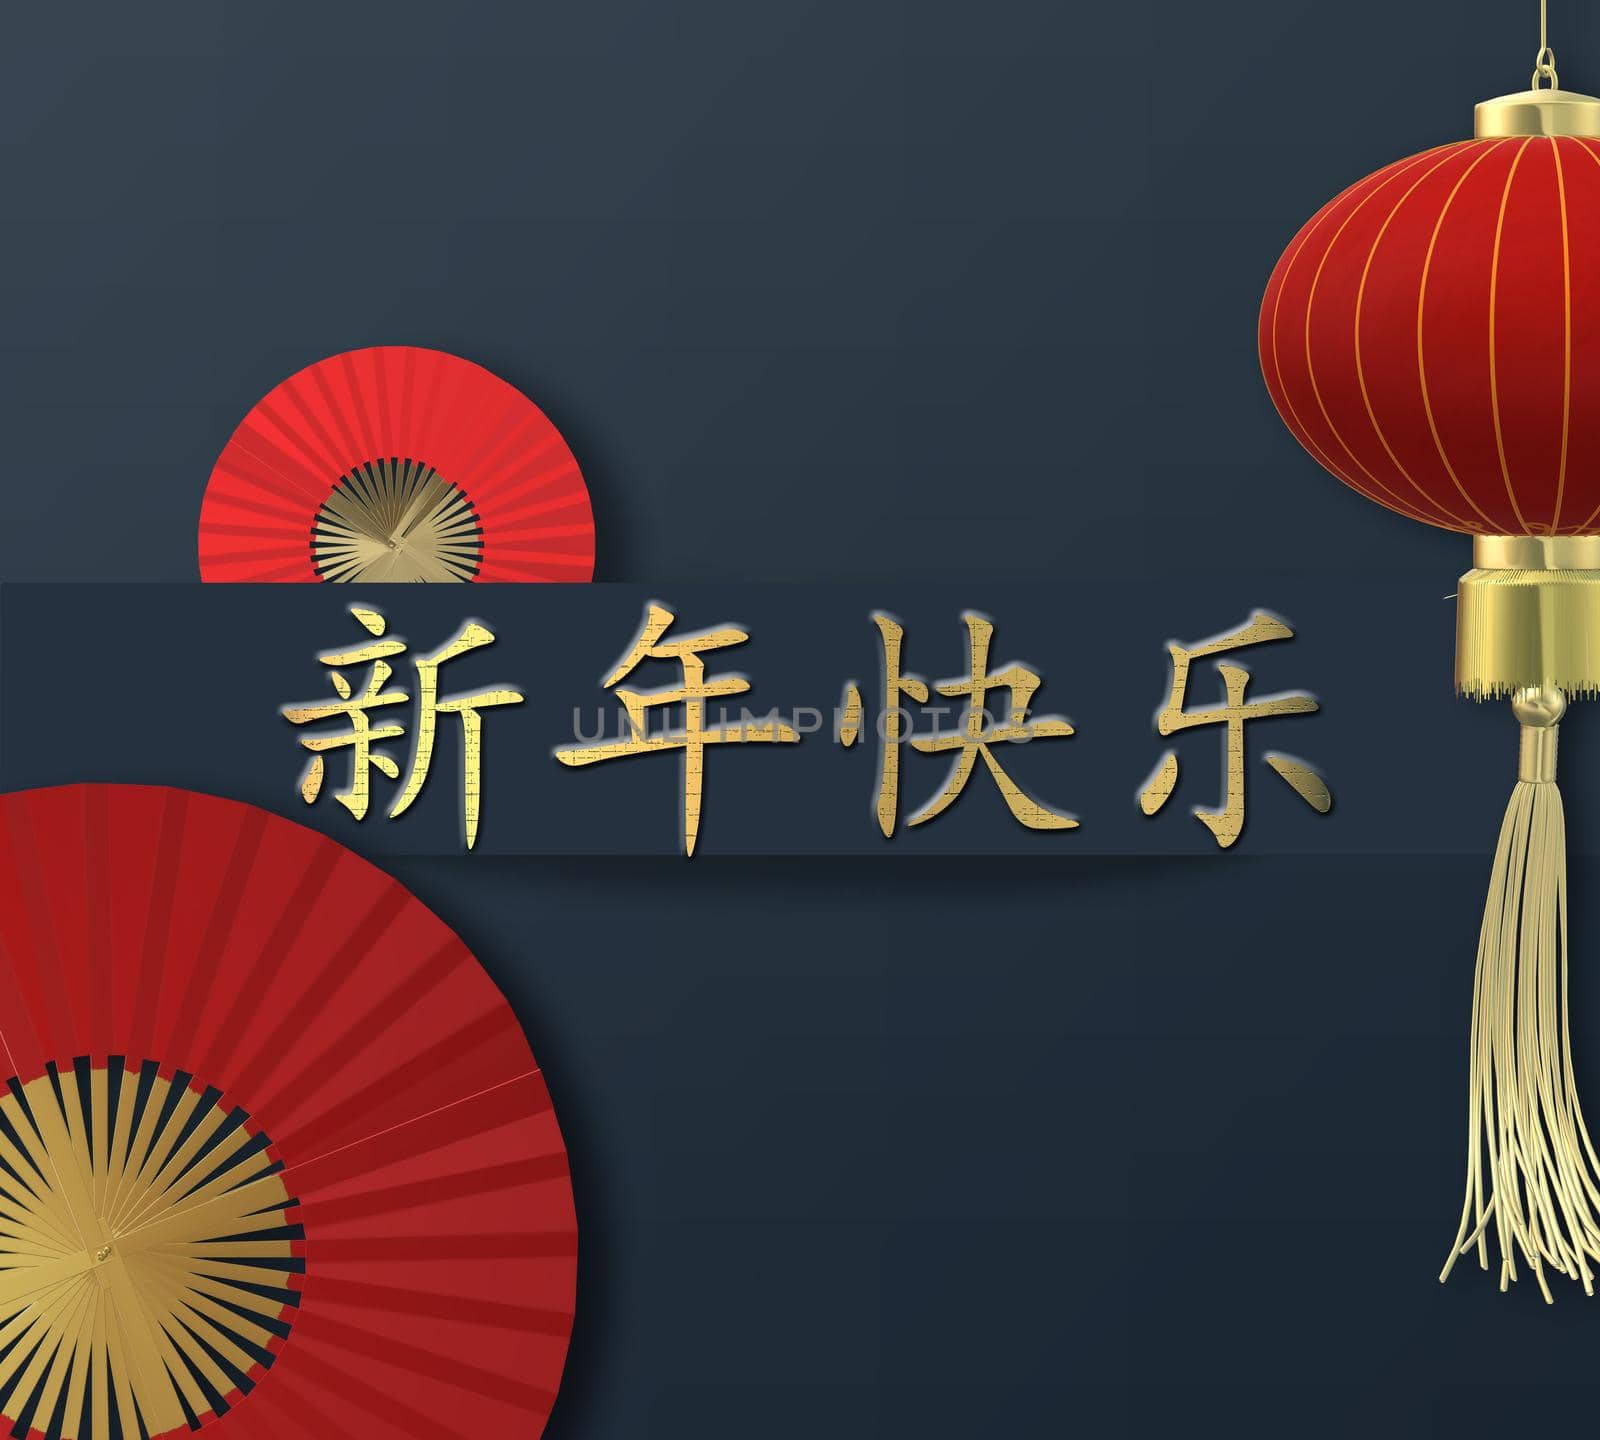 Happy New Year card. Happy Chinese new year golden text in Chinese, red fans, lantrn. Design for greetings card, invitation, posters, brochure, calendar, flyers, banners. 3D illustration